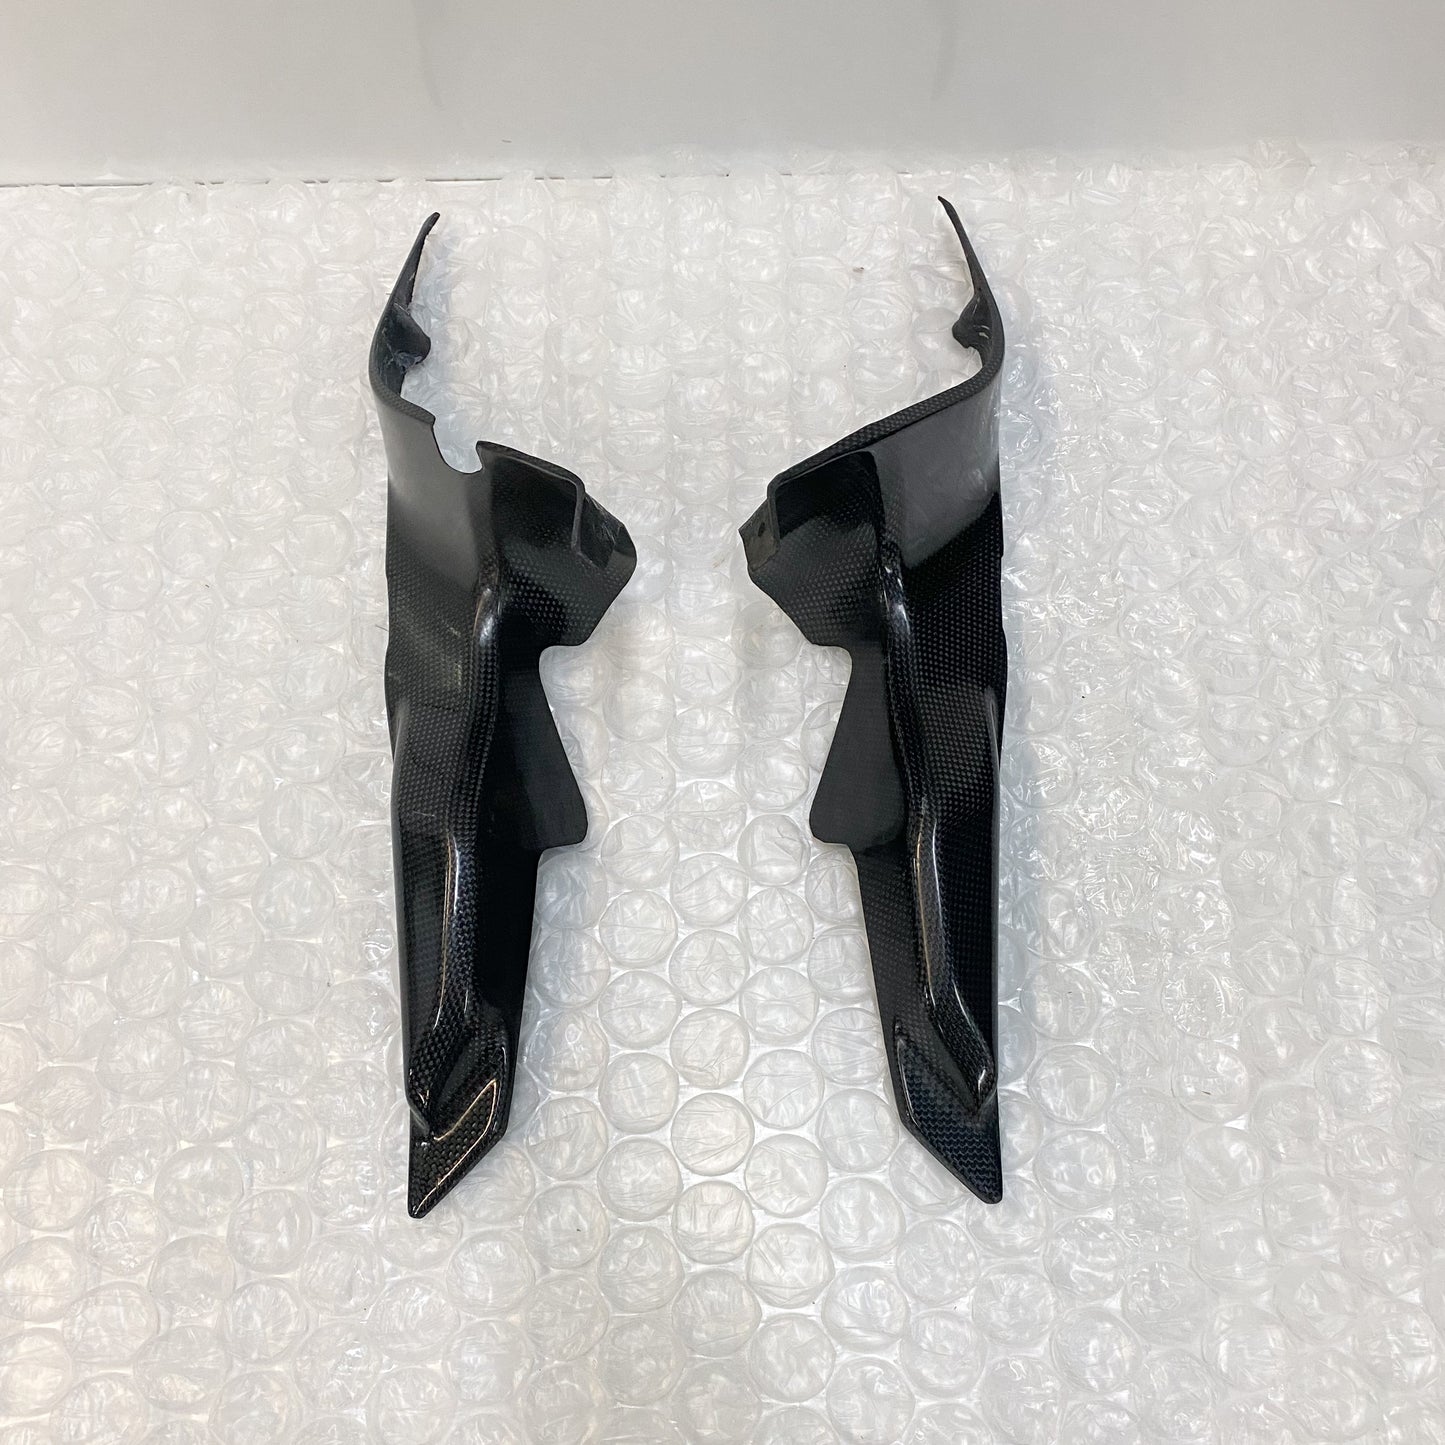 Ducati Carbon Air Duct Covers 1098R/1198R 460Z0021A& 460Z0021B USED